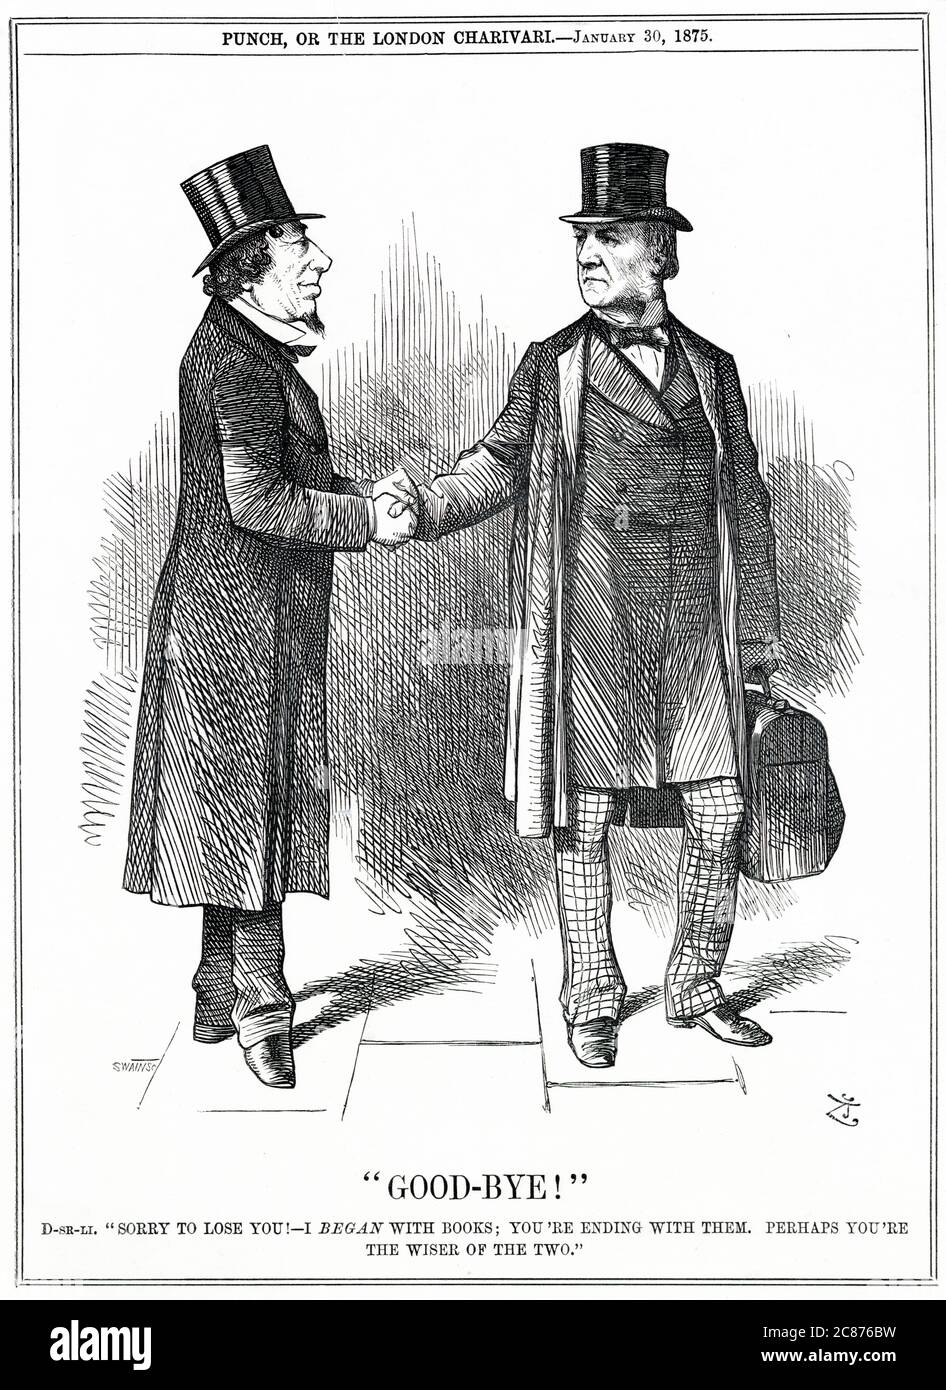 Cartoon, Good-Bye!  Conservative Prime Minister Benjamin Disraeli says goodbye to his political rival, William Gladstone, who was giving up the leadership of the Liberal Party, and not intending to appear much in Parliament during the 1875 sessions. Gladstone had already published a pamphlet challenging the Pope's claim to infallibility, and was about to publish a second one defending the first pamphlet against various criticisms it had attracted. (Gladstone would return to politics later.) Stock Photo